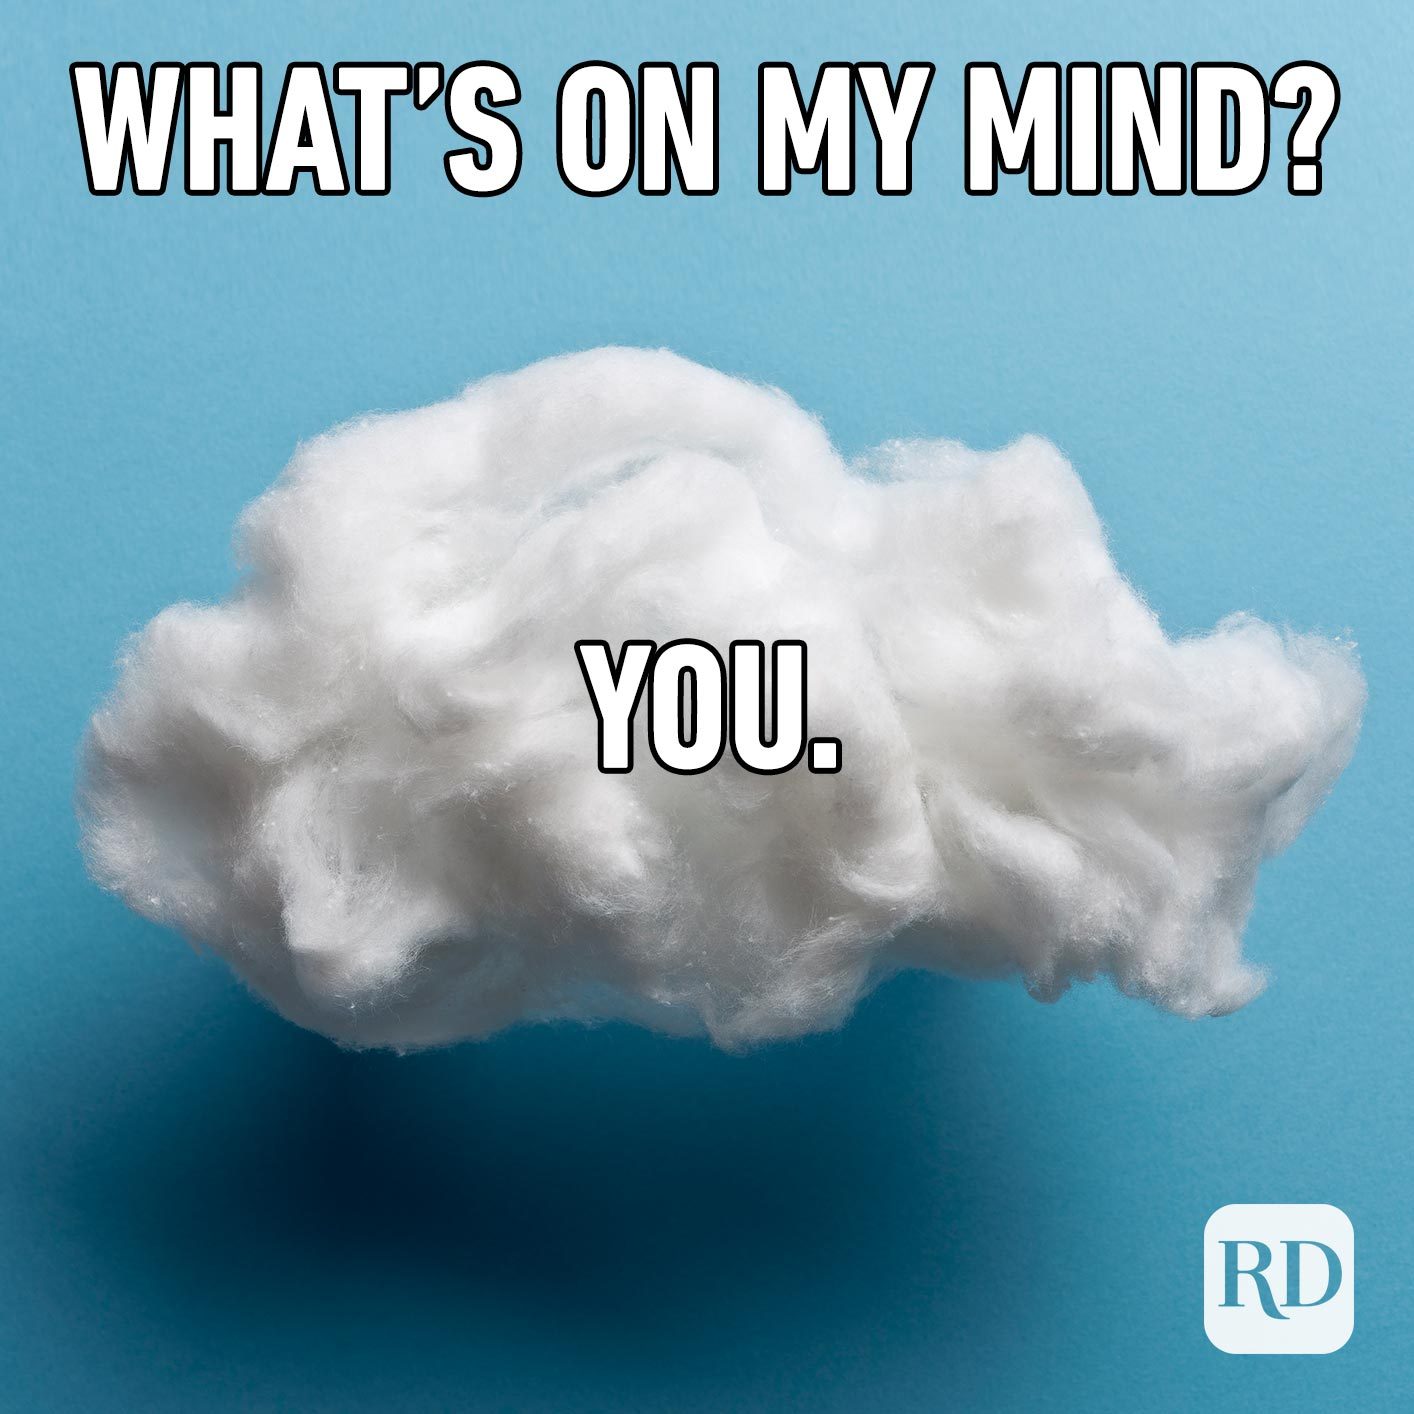 Cloud. Meme text: What's on my mind? You.